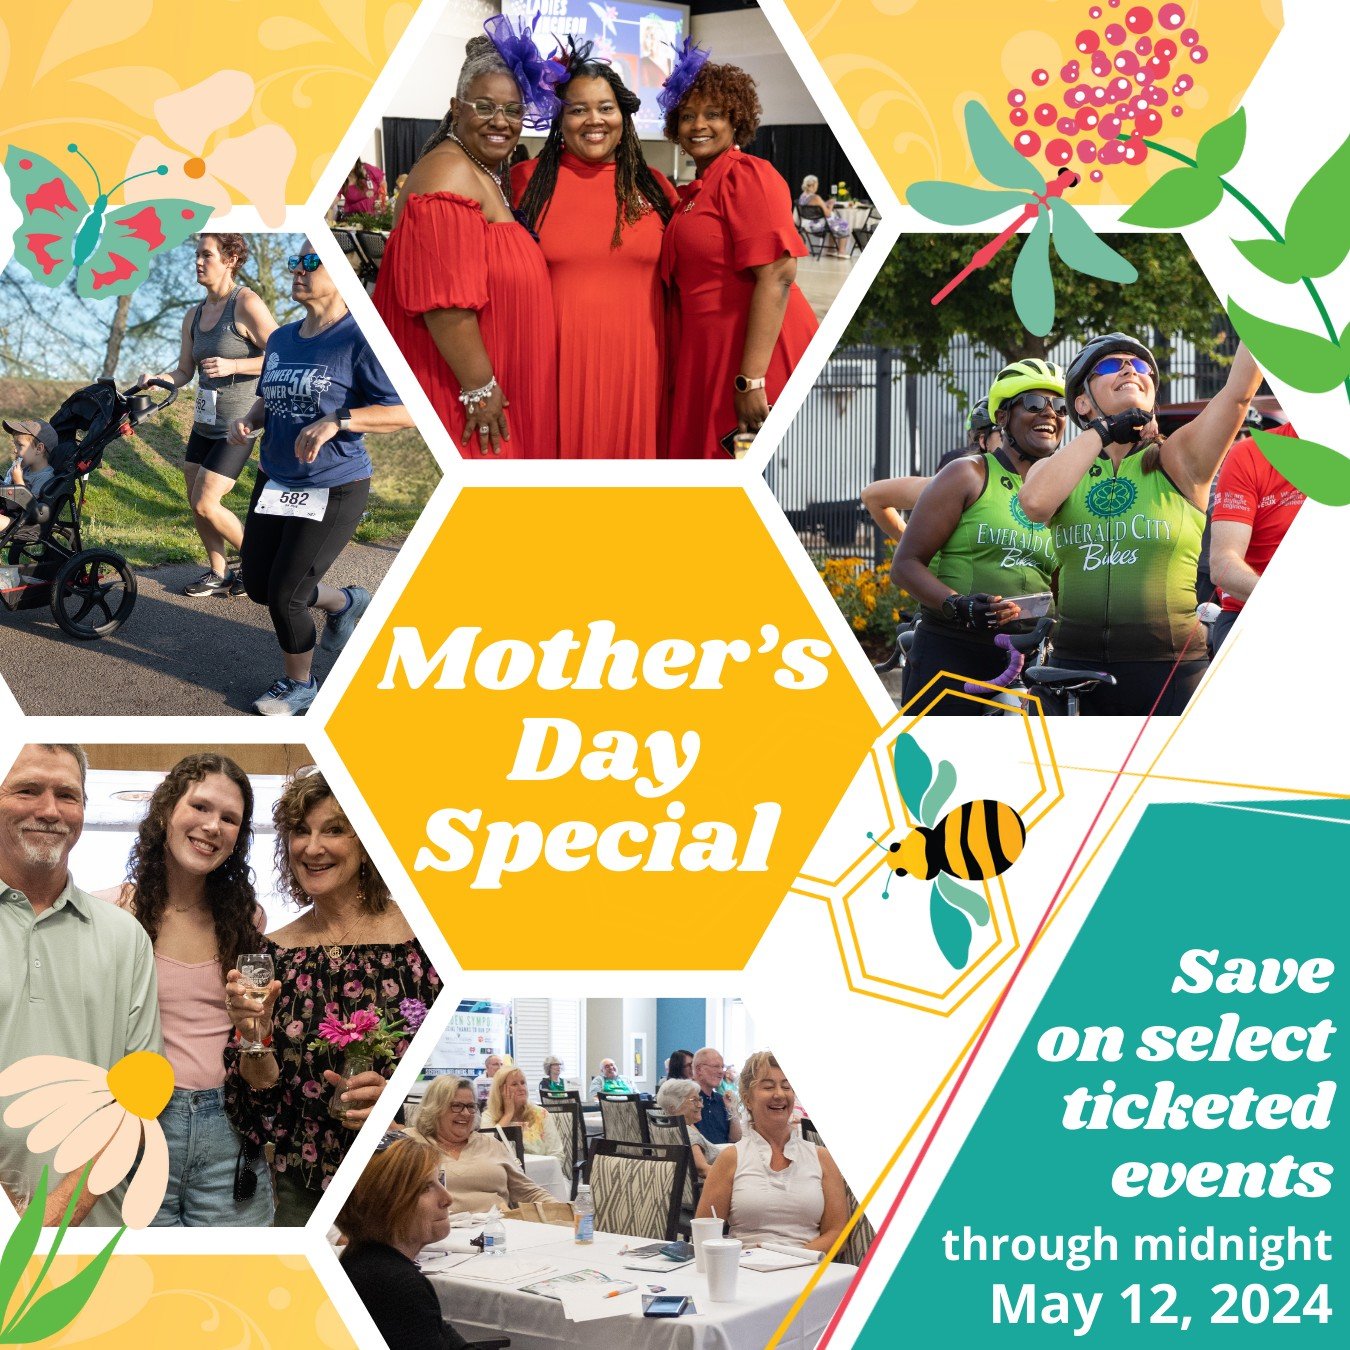 Looking for the perfect gift for your mom, wife, best friends, or even employees? Tickets (and time together) are sure to put a smile on their faces!

Right now we have a special appreciation offer: Use code Flowers4Mom to get $5 off your tickets or 